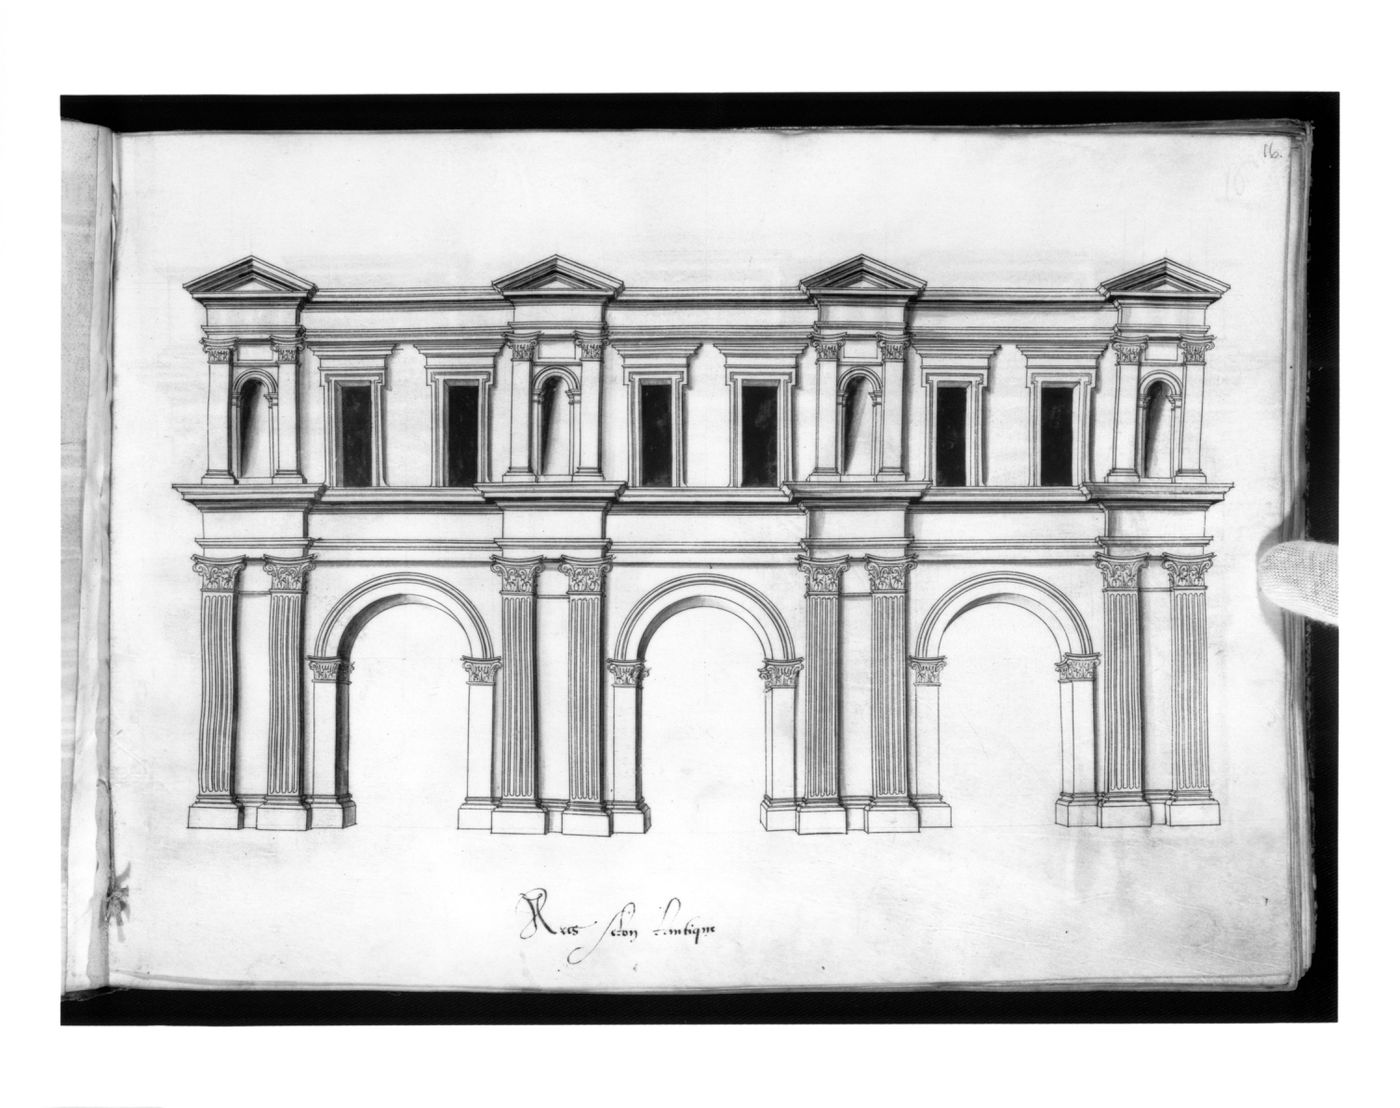 Design for arches in the antique manner